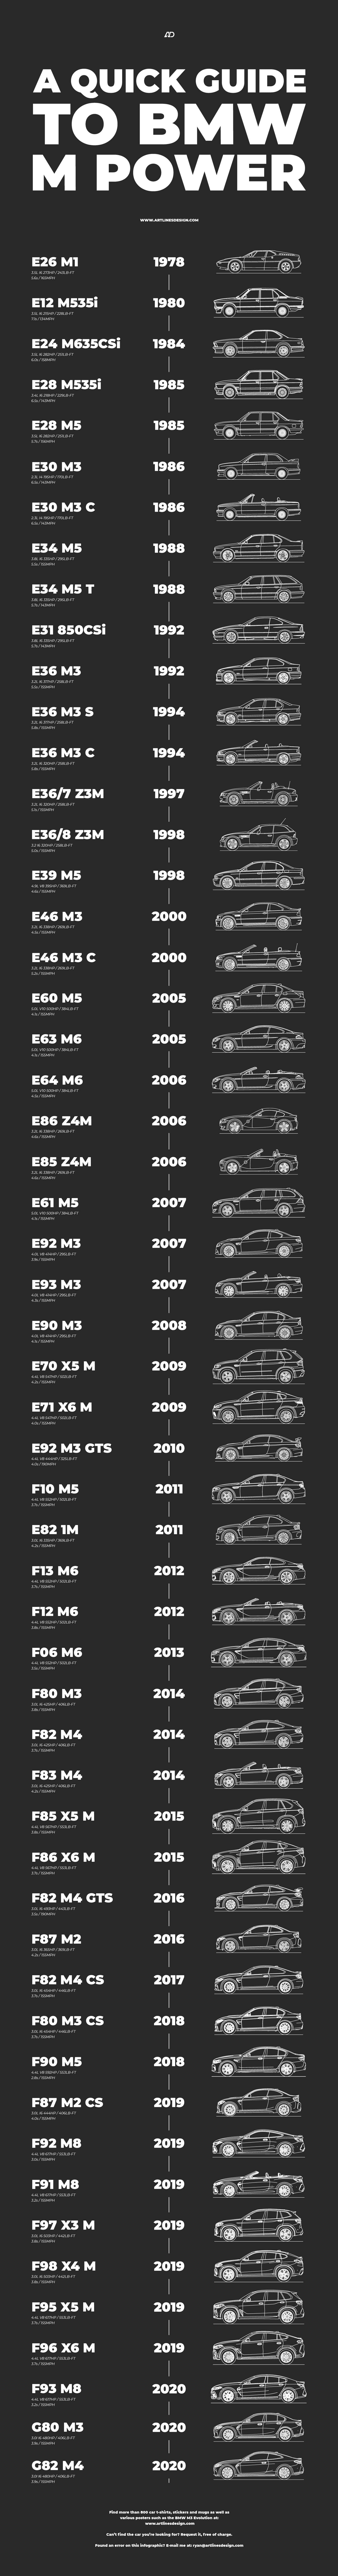 An easy and historical reference to BMW M cars